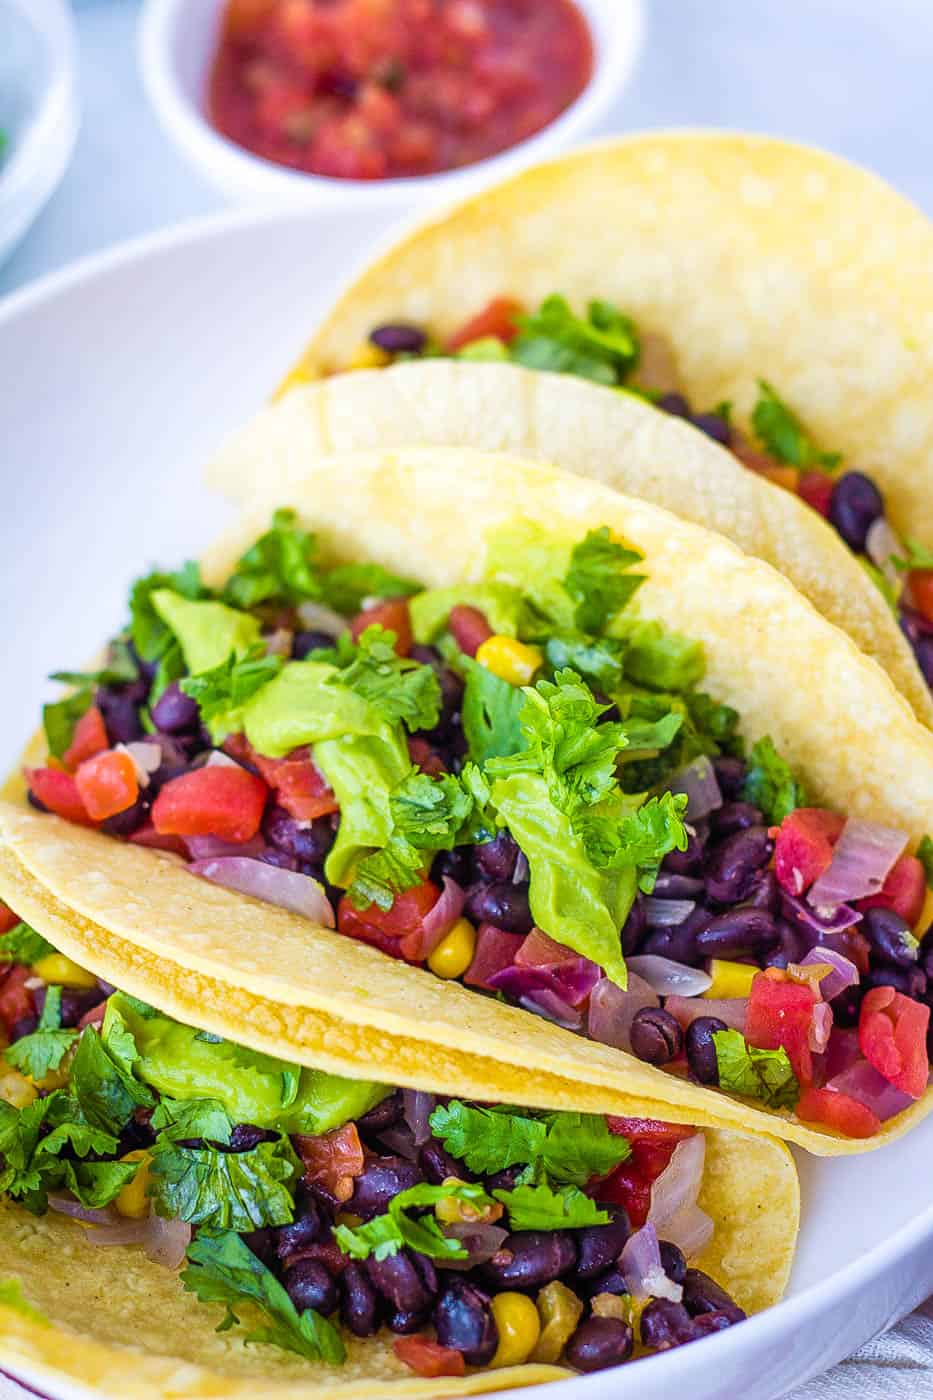 vegan tacos  with lots of taco toppings -- black beans, avocado, veggies, and cilantro, served on a white plate